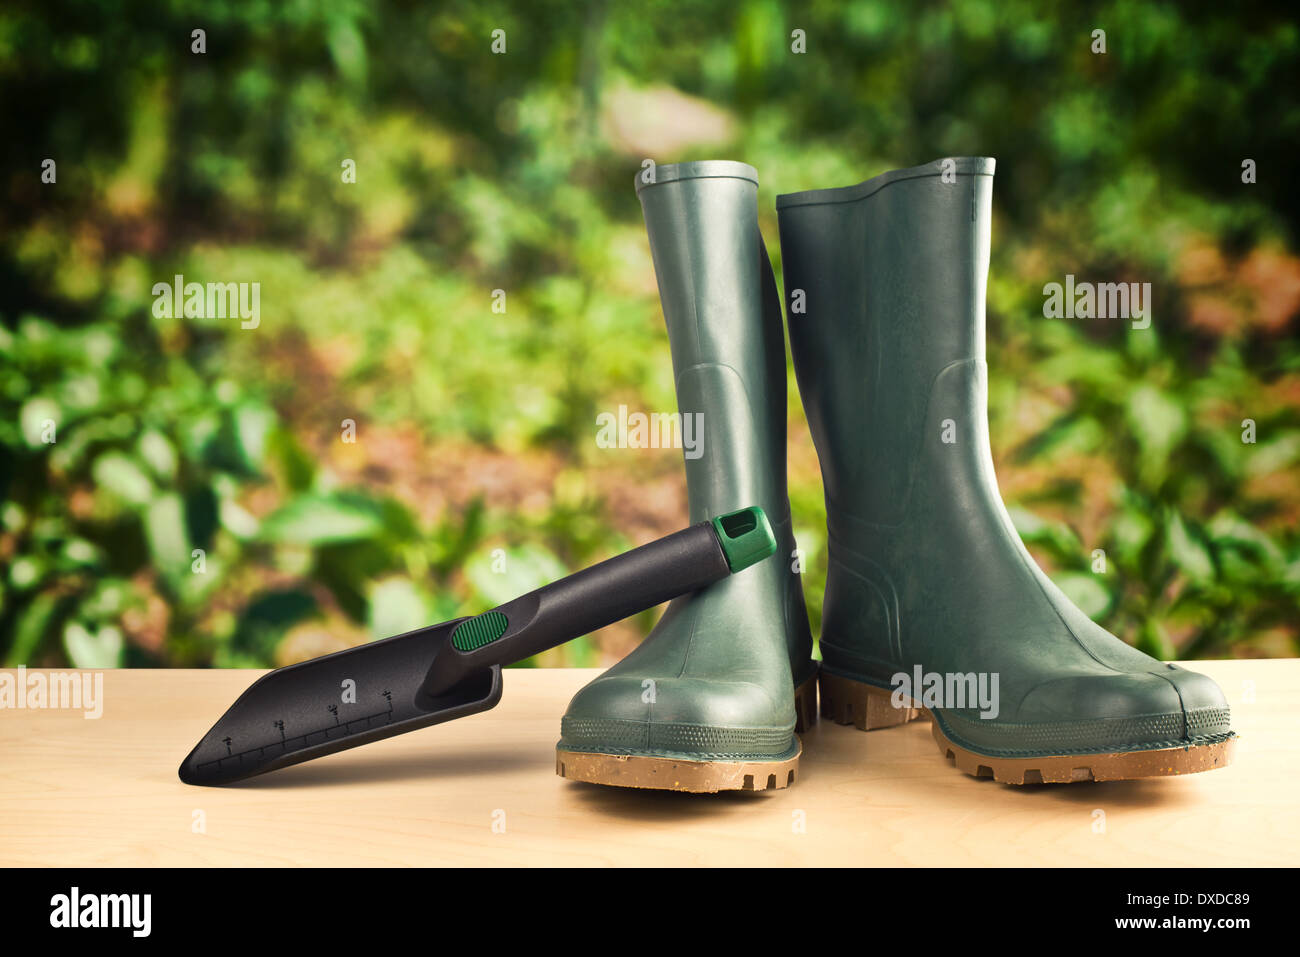 Green rubber boots. Agricultural working boots for all sorts of garden work. Stock Photo